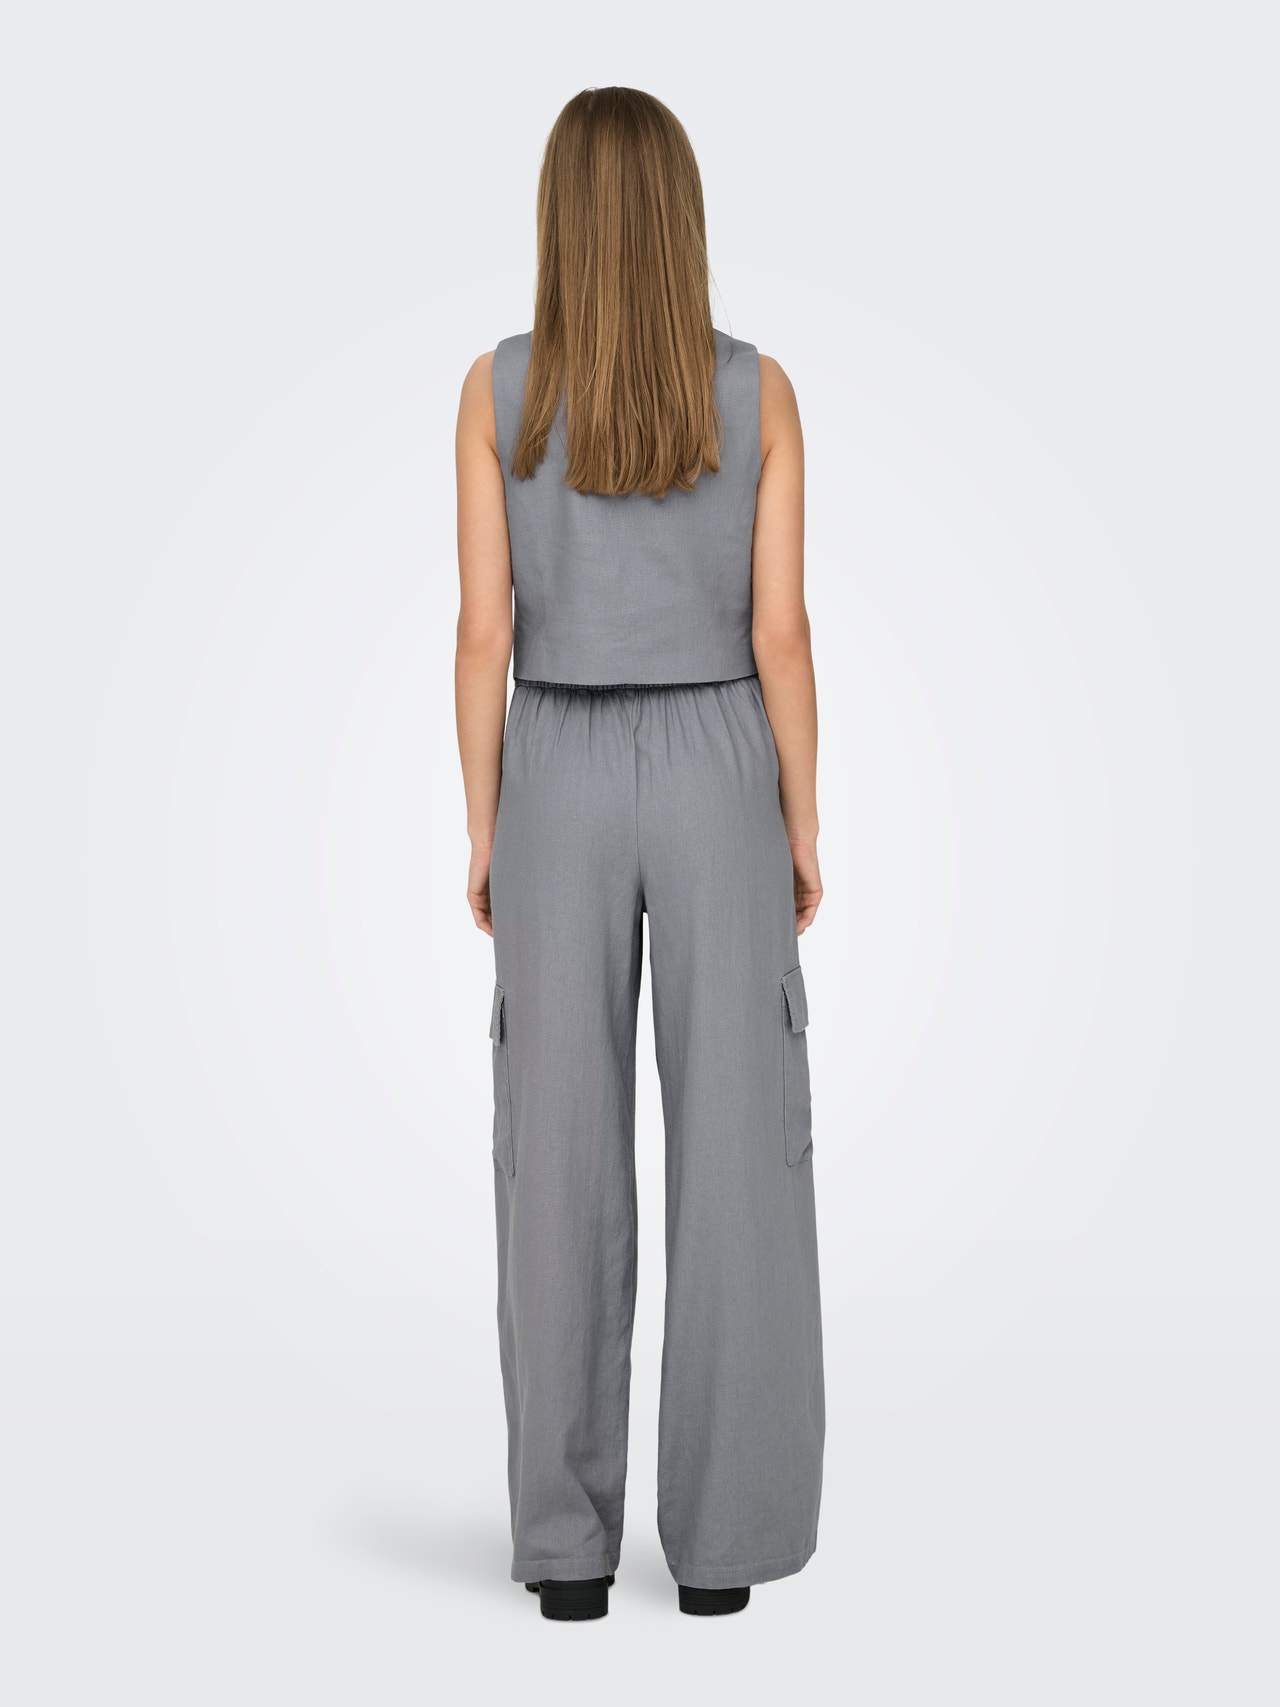 ONLY Trousers with wide leg fit and high waist -Sleet - 15325001